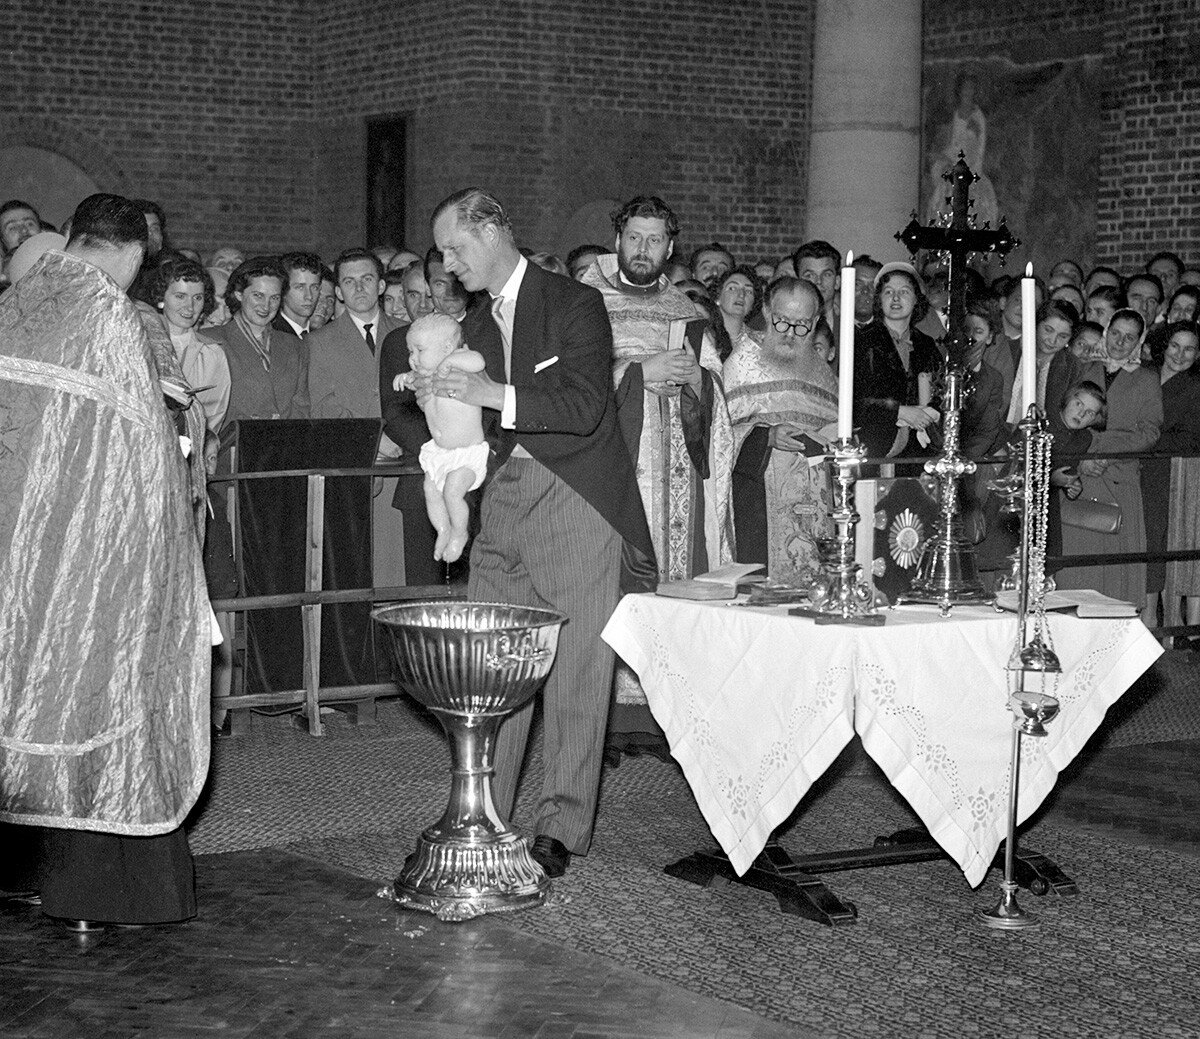 The Duke of Edinburgh, who is the godfather to the child, lifts baby Princess Marija from the font after her christening at the Serbian Orthodox Church. The baby is the daughter of the Duke's niece Princess Christina of Hesse and Prince Andrej of Yugoslavia.